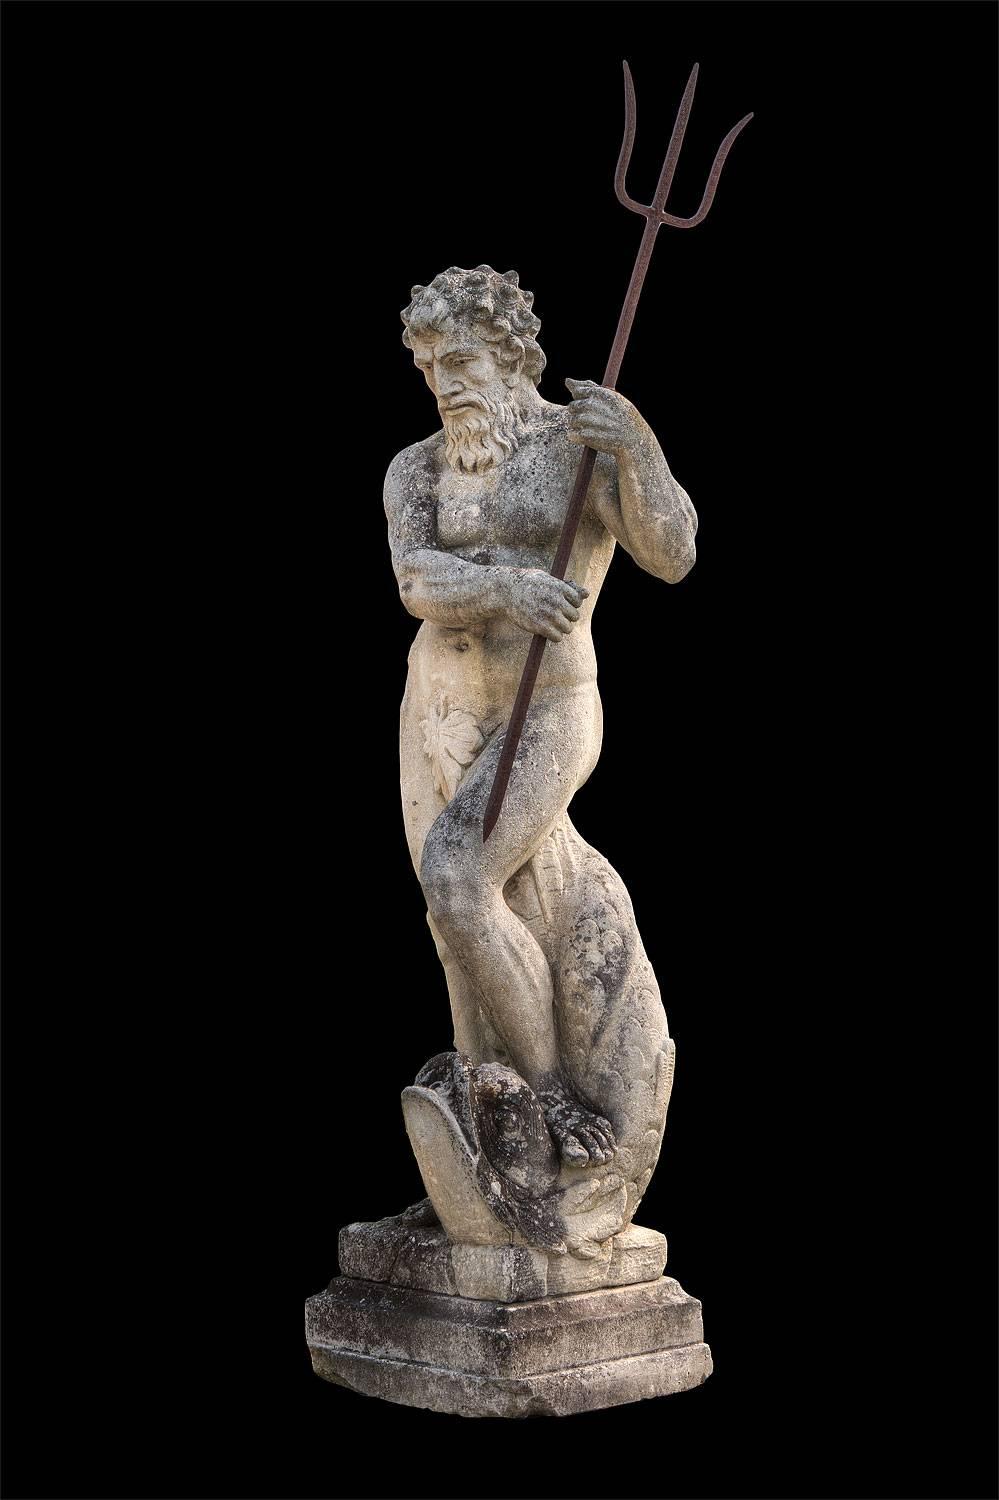 Neptune is the creator of horses and is the god of the sea as well as the owner of a powerful weapon, the Trident. Poseidon is the Greek Neptune and is one of the big three gods Zeus, Hades and Poseidon.
Proveniente from an important Villa